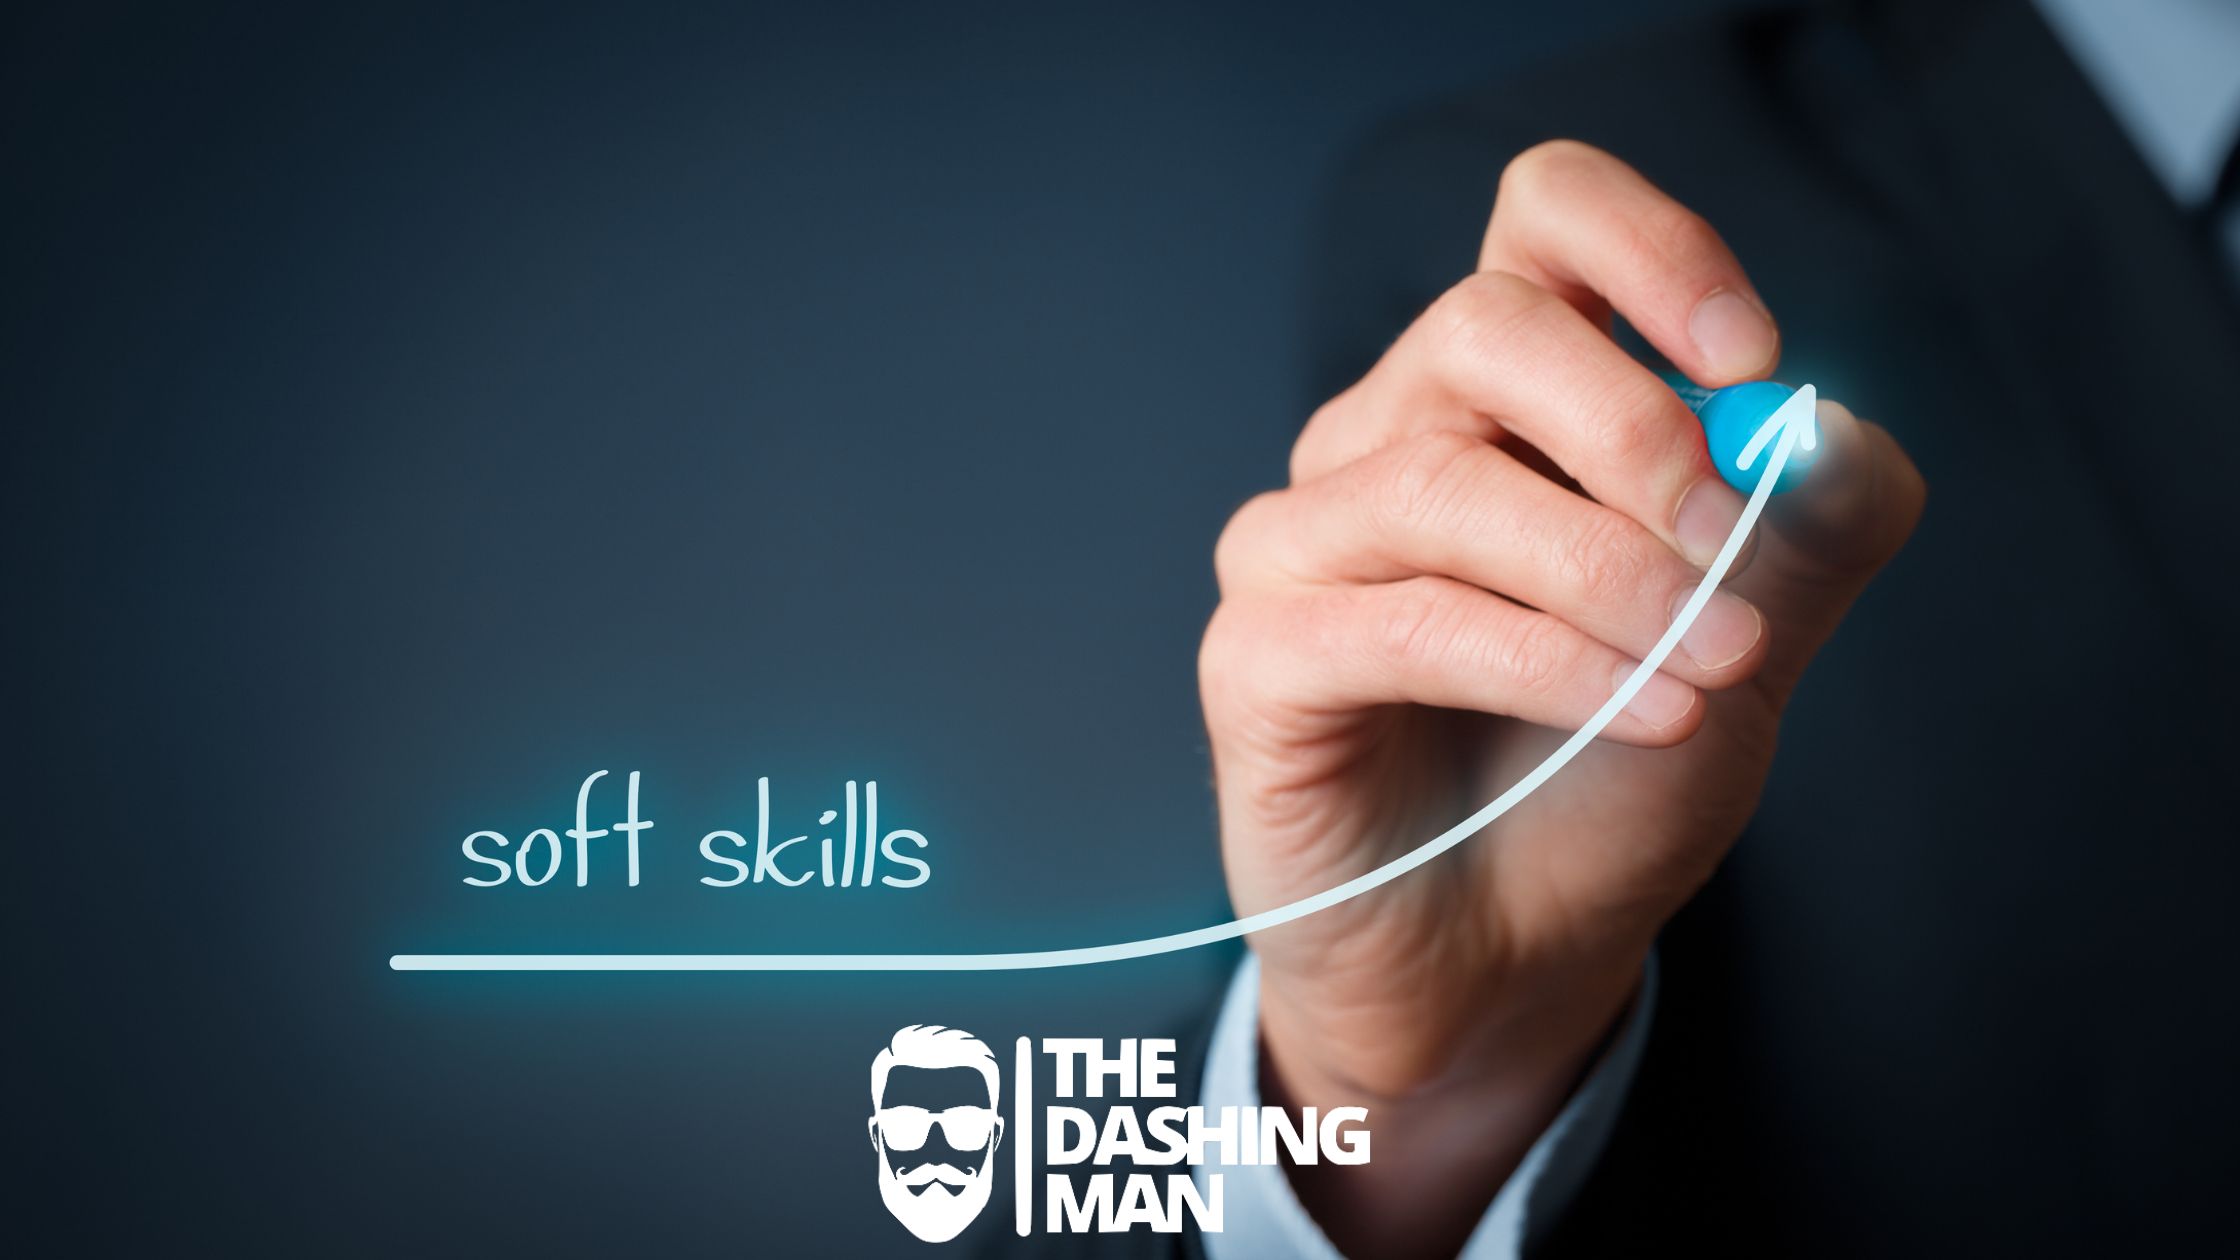 10 Practical Ways to Develop Your Soft Skills